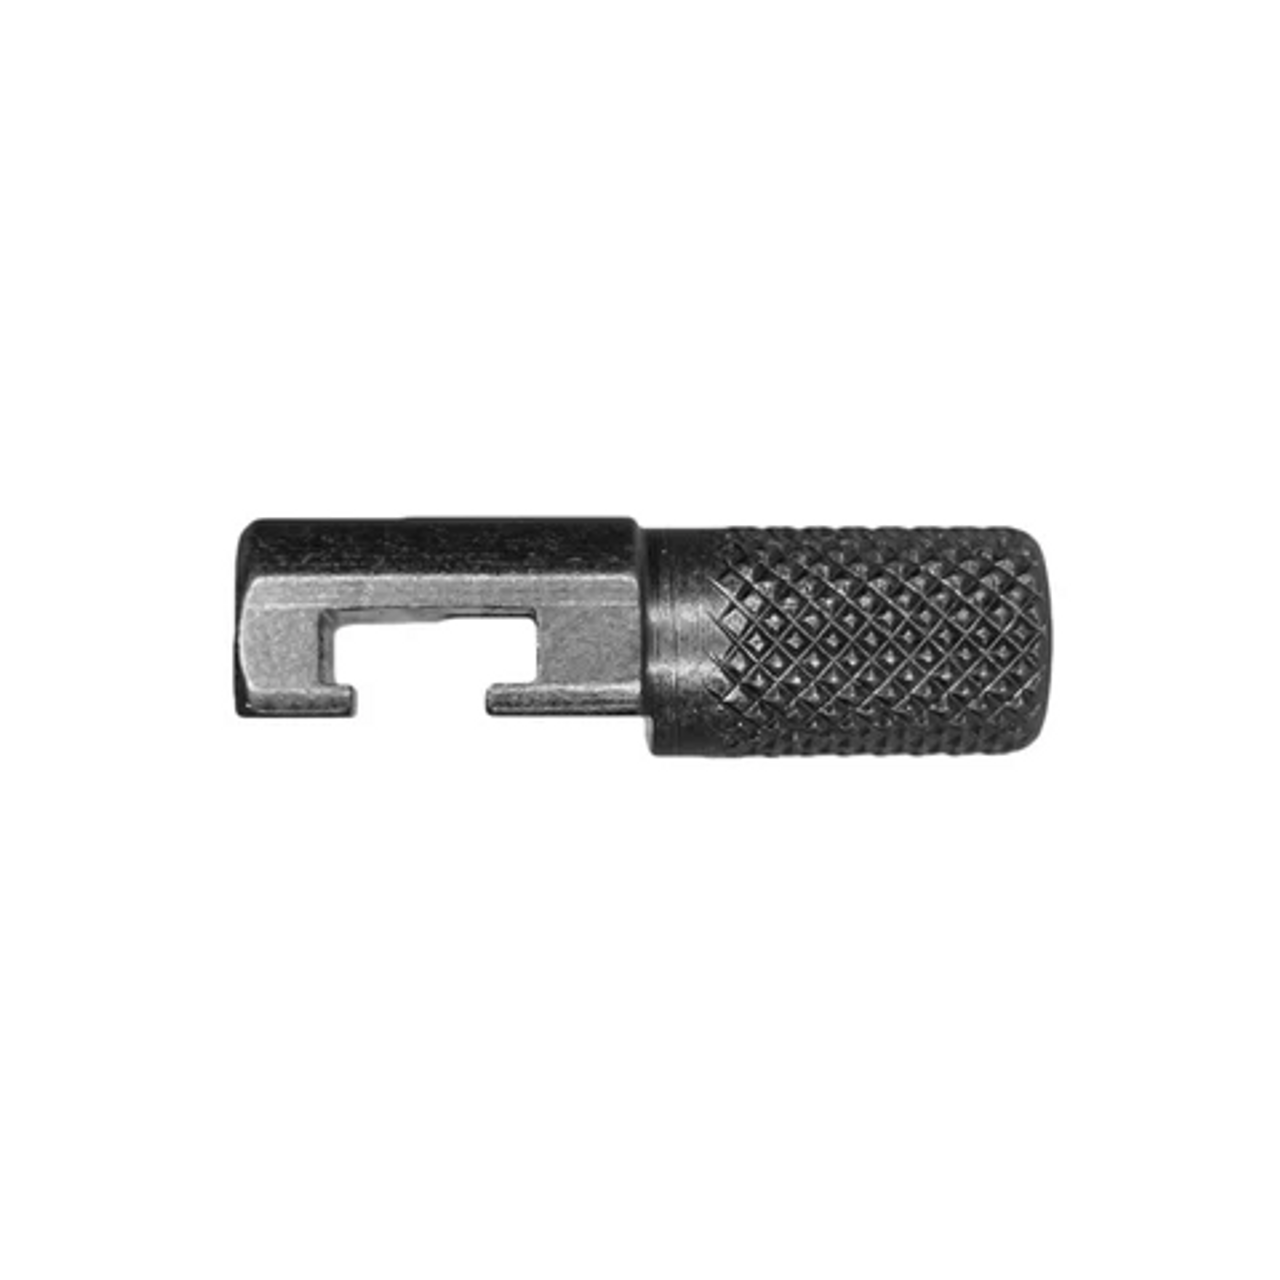 Grovtec Hammer Extension for Win 94S, Ithaca X-Caliber, Blk